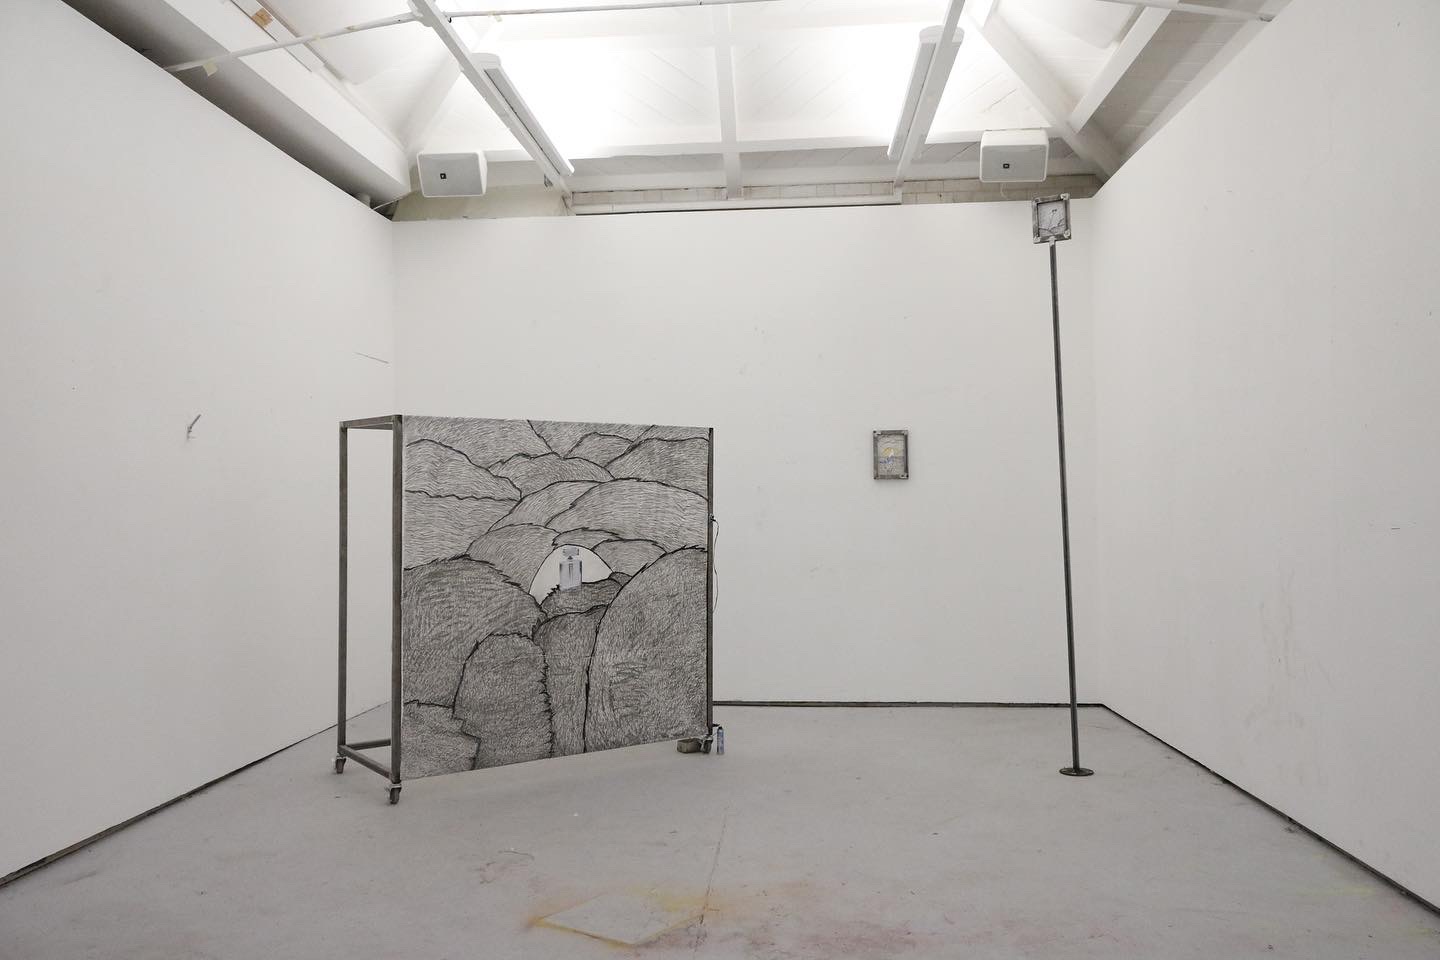 3 metal sculptures framing drawings in a white room. The largest
one (on wheels) includes a stock photo and has a motion sensor
attached to it, linked to an Arduino which sprays 'Impulse - tease'- (£1 body spray) on viewers.